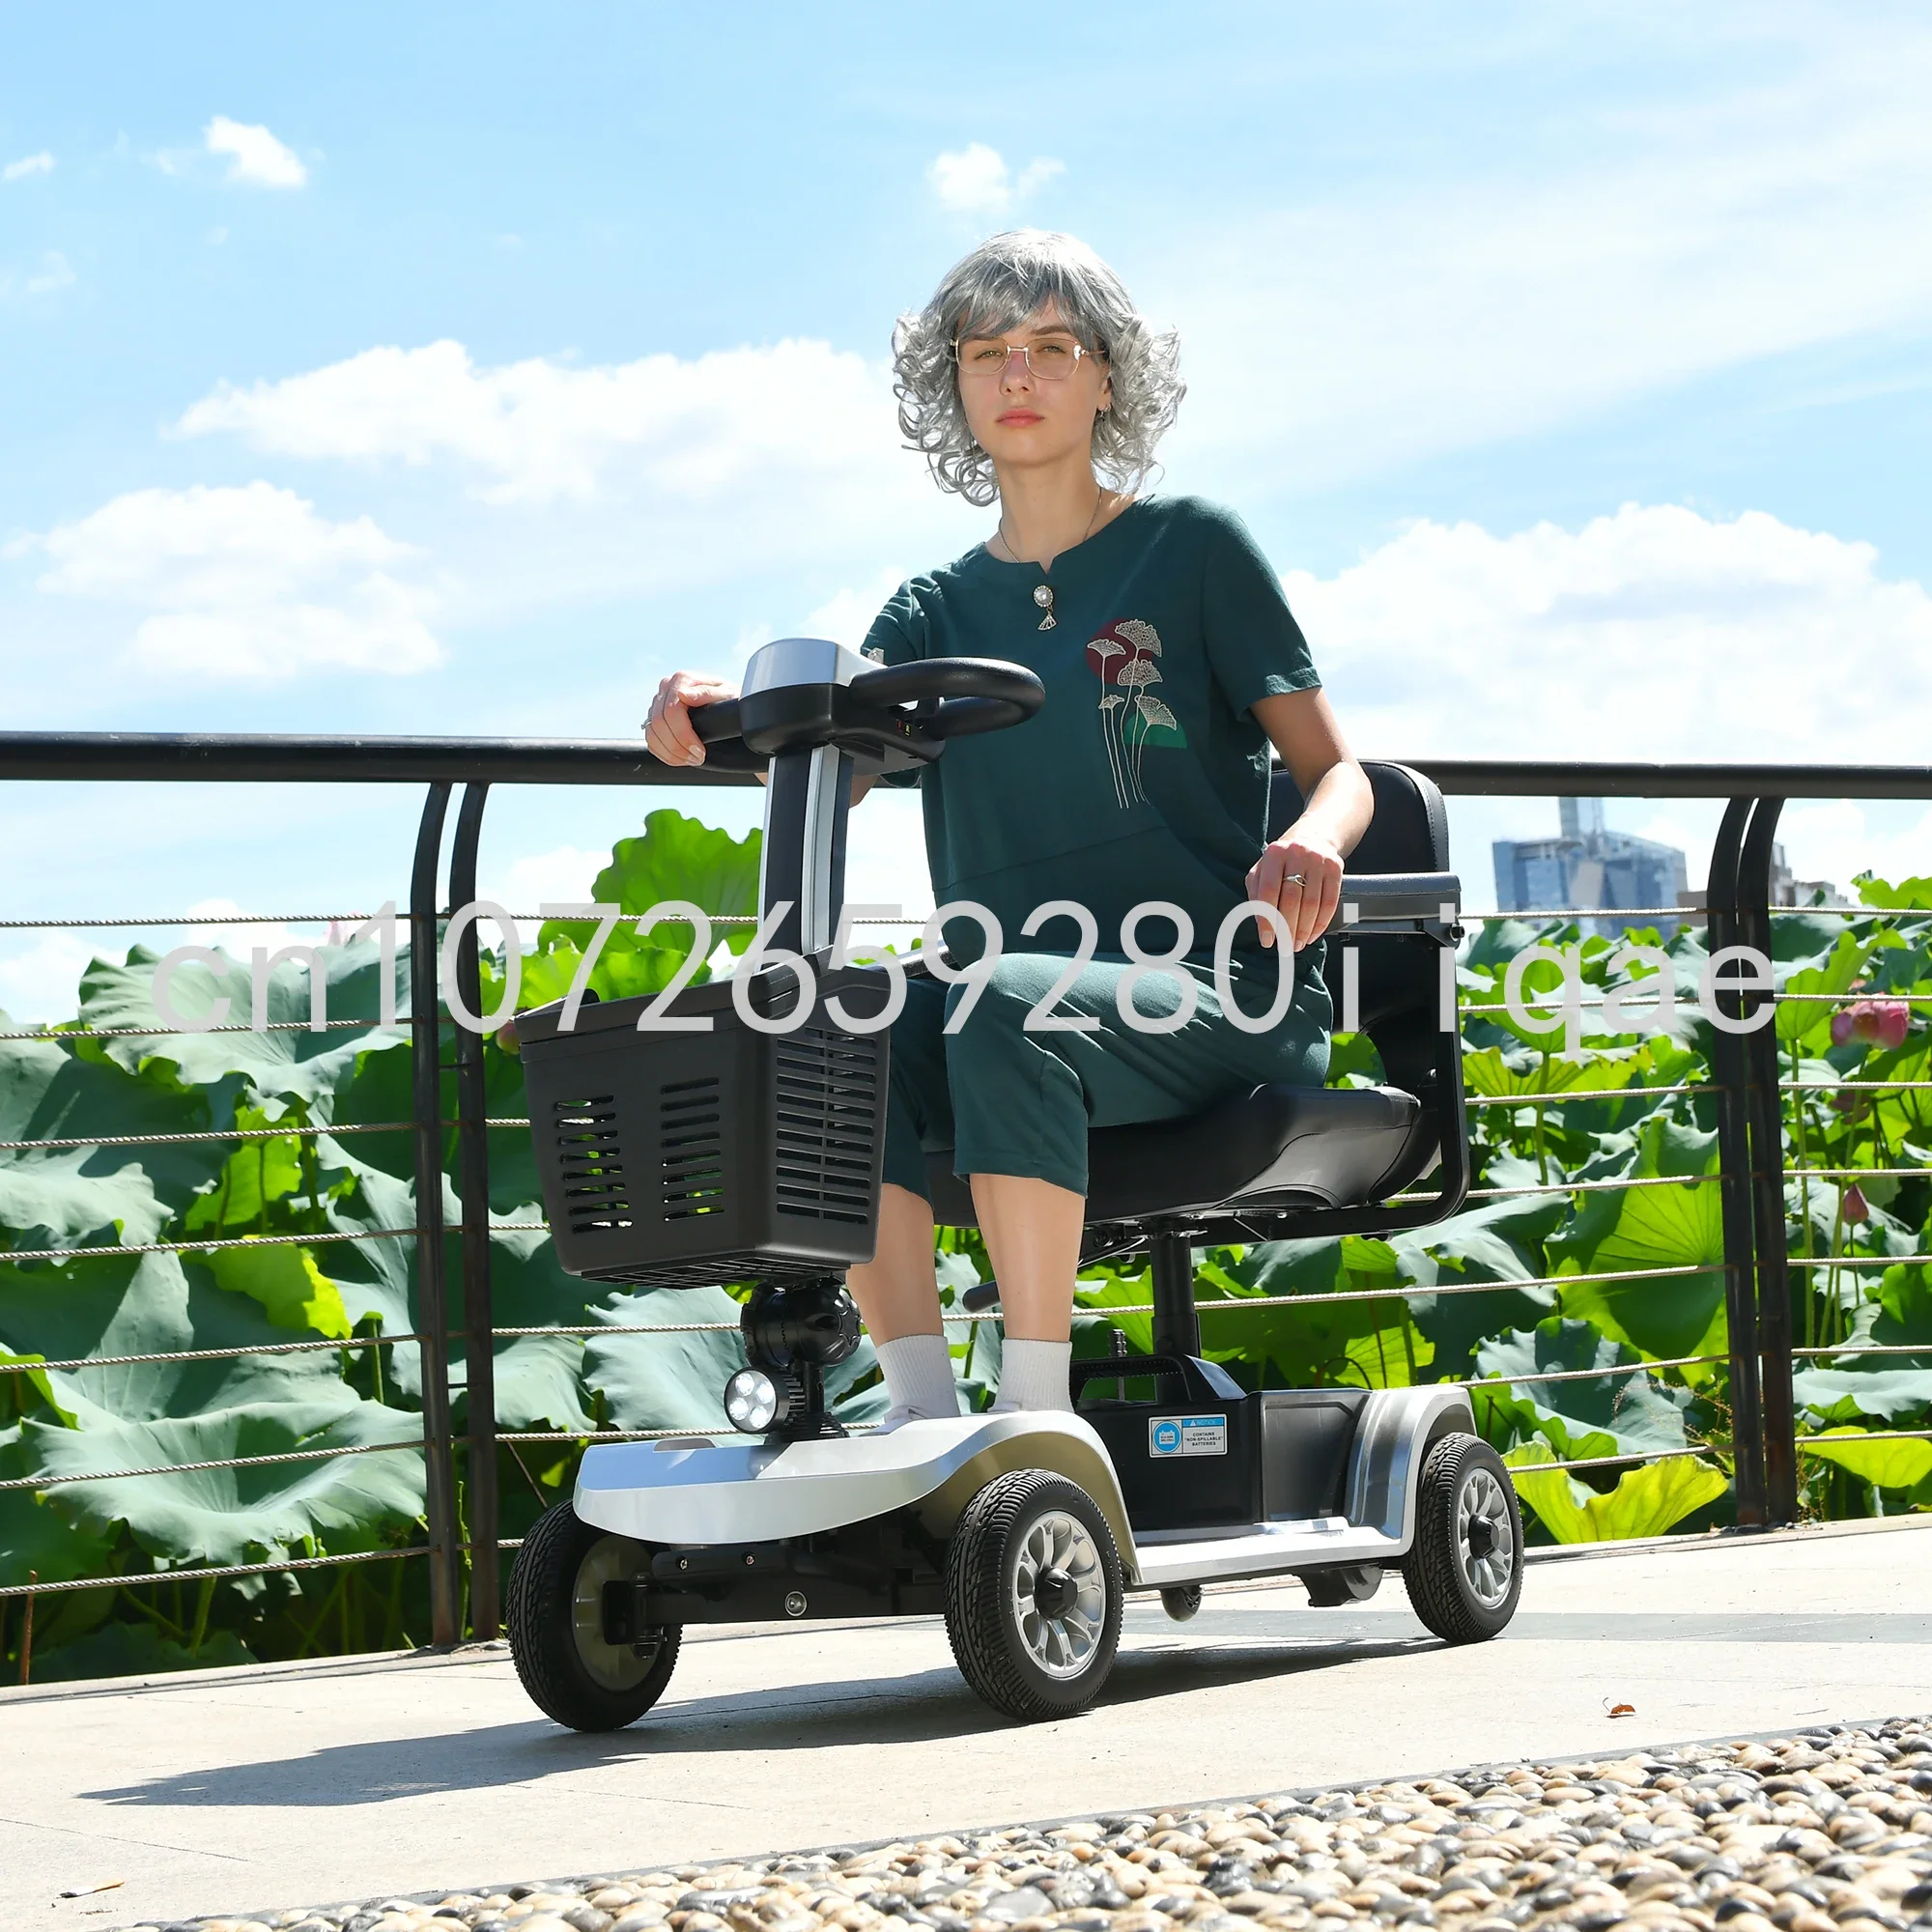 

250W Electric Mobility Scooter 4 Wheels Handicapped Scooter For Adult Elderly Disabled People Outdoor With Foldable Function